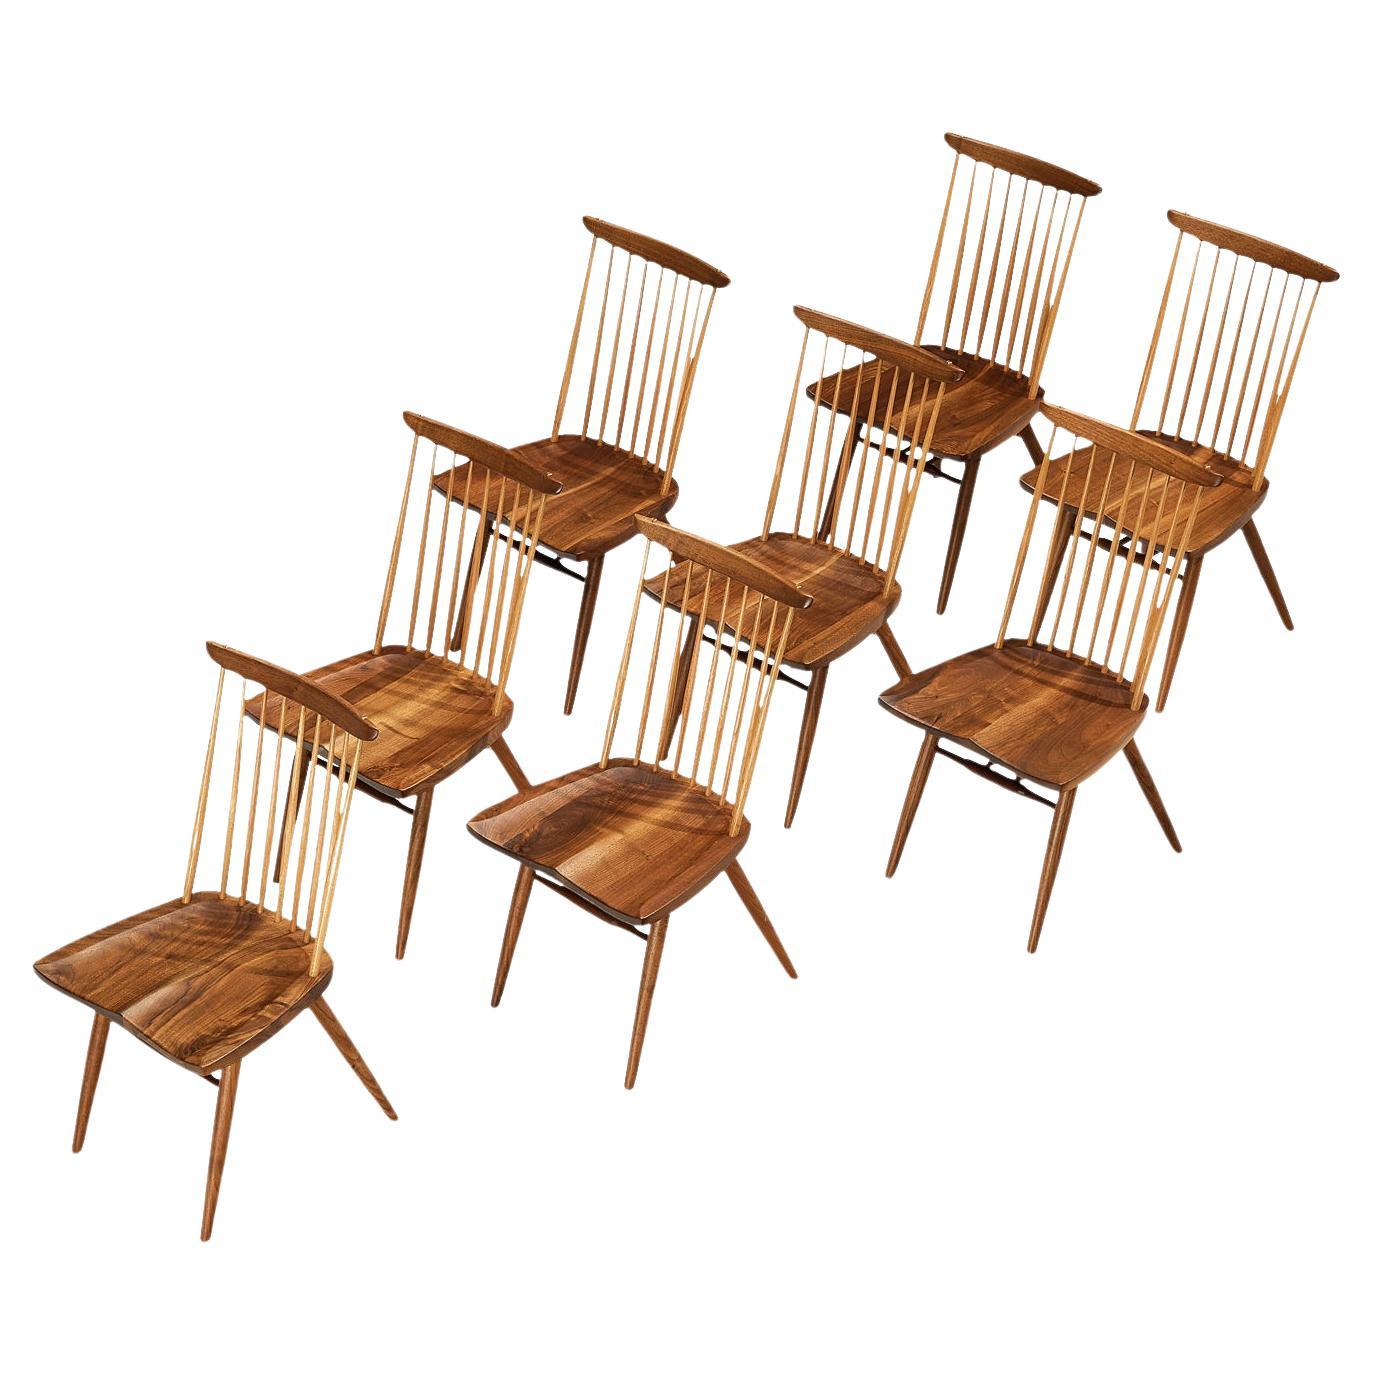 George Nakashima 'New' Dining Chairs in Walnut and Hickory